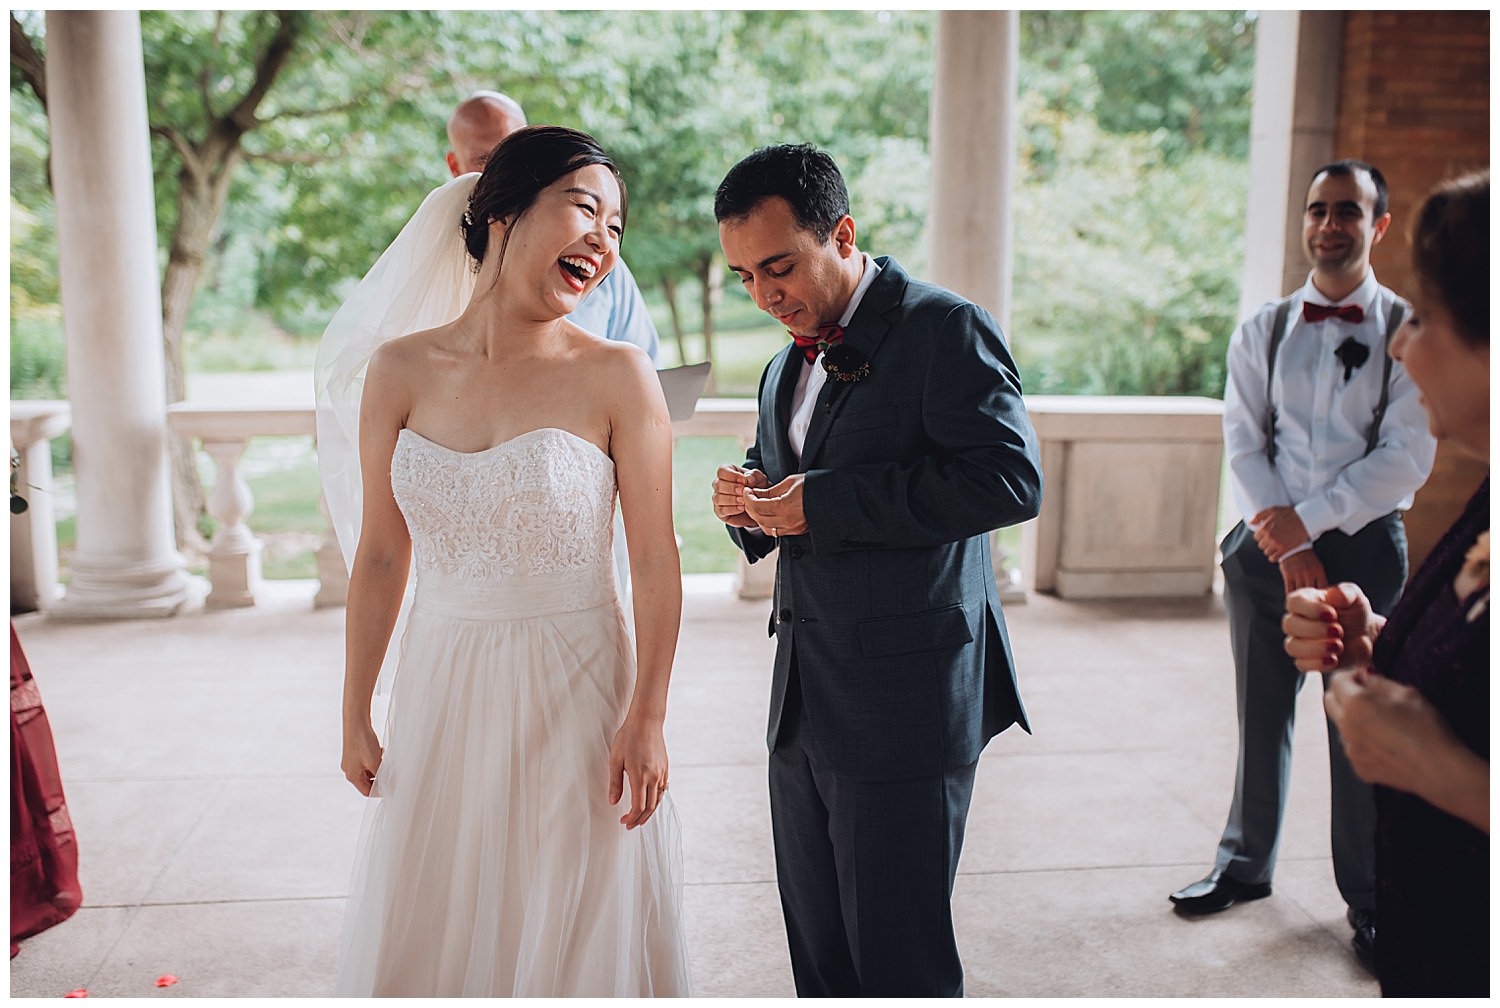 Columbus Park Refectory Wedding, groom trying to open a necklasse while bride laughing during ceremony